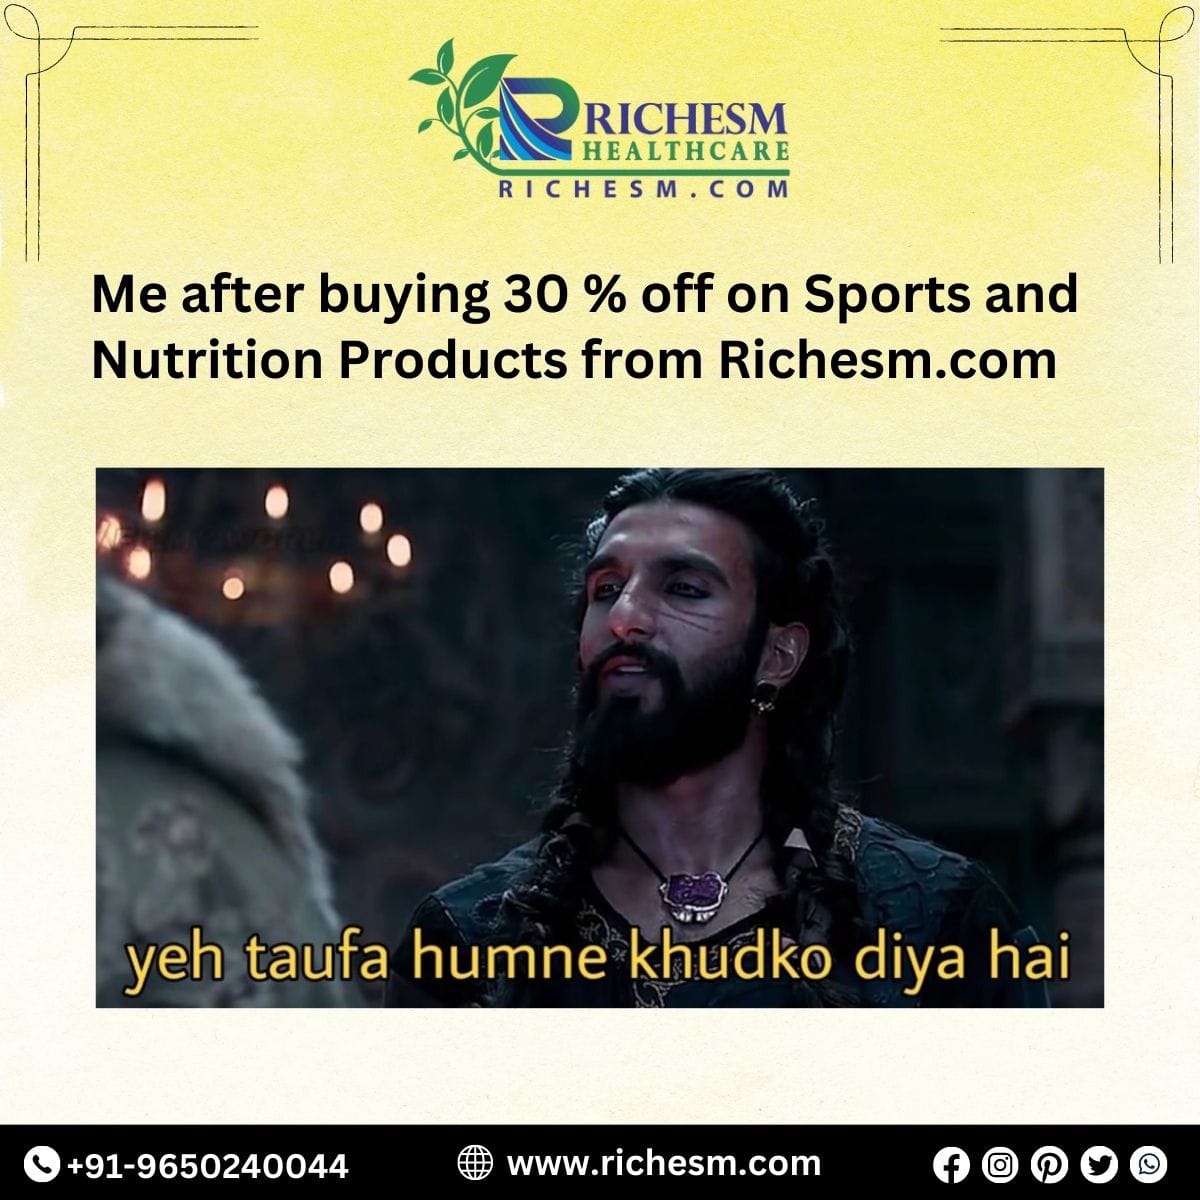 New 30 Off Sports and Nutrition Products from Richesm.com